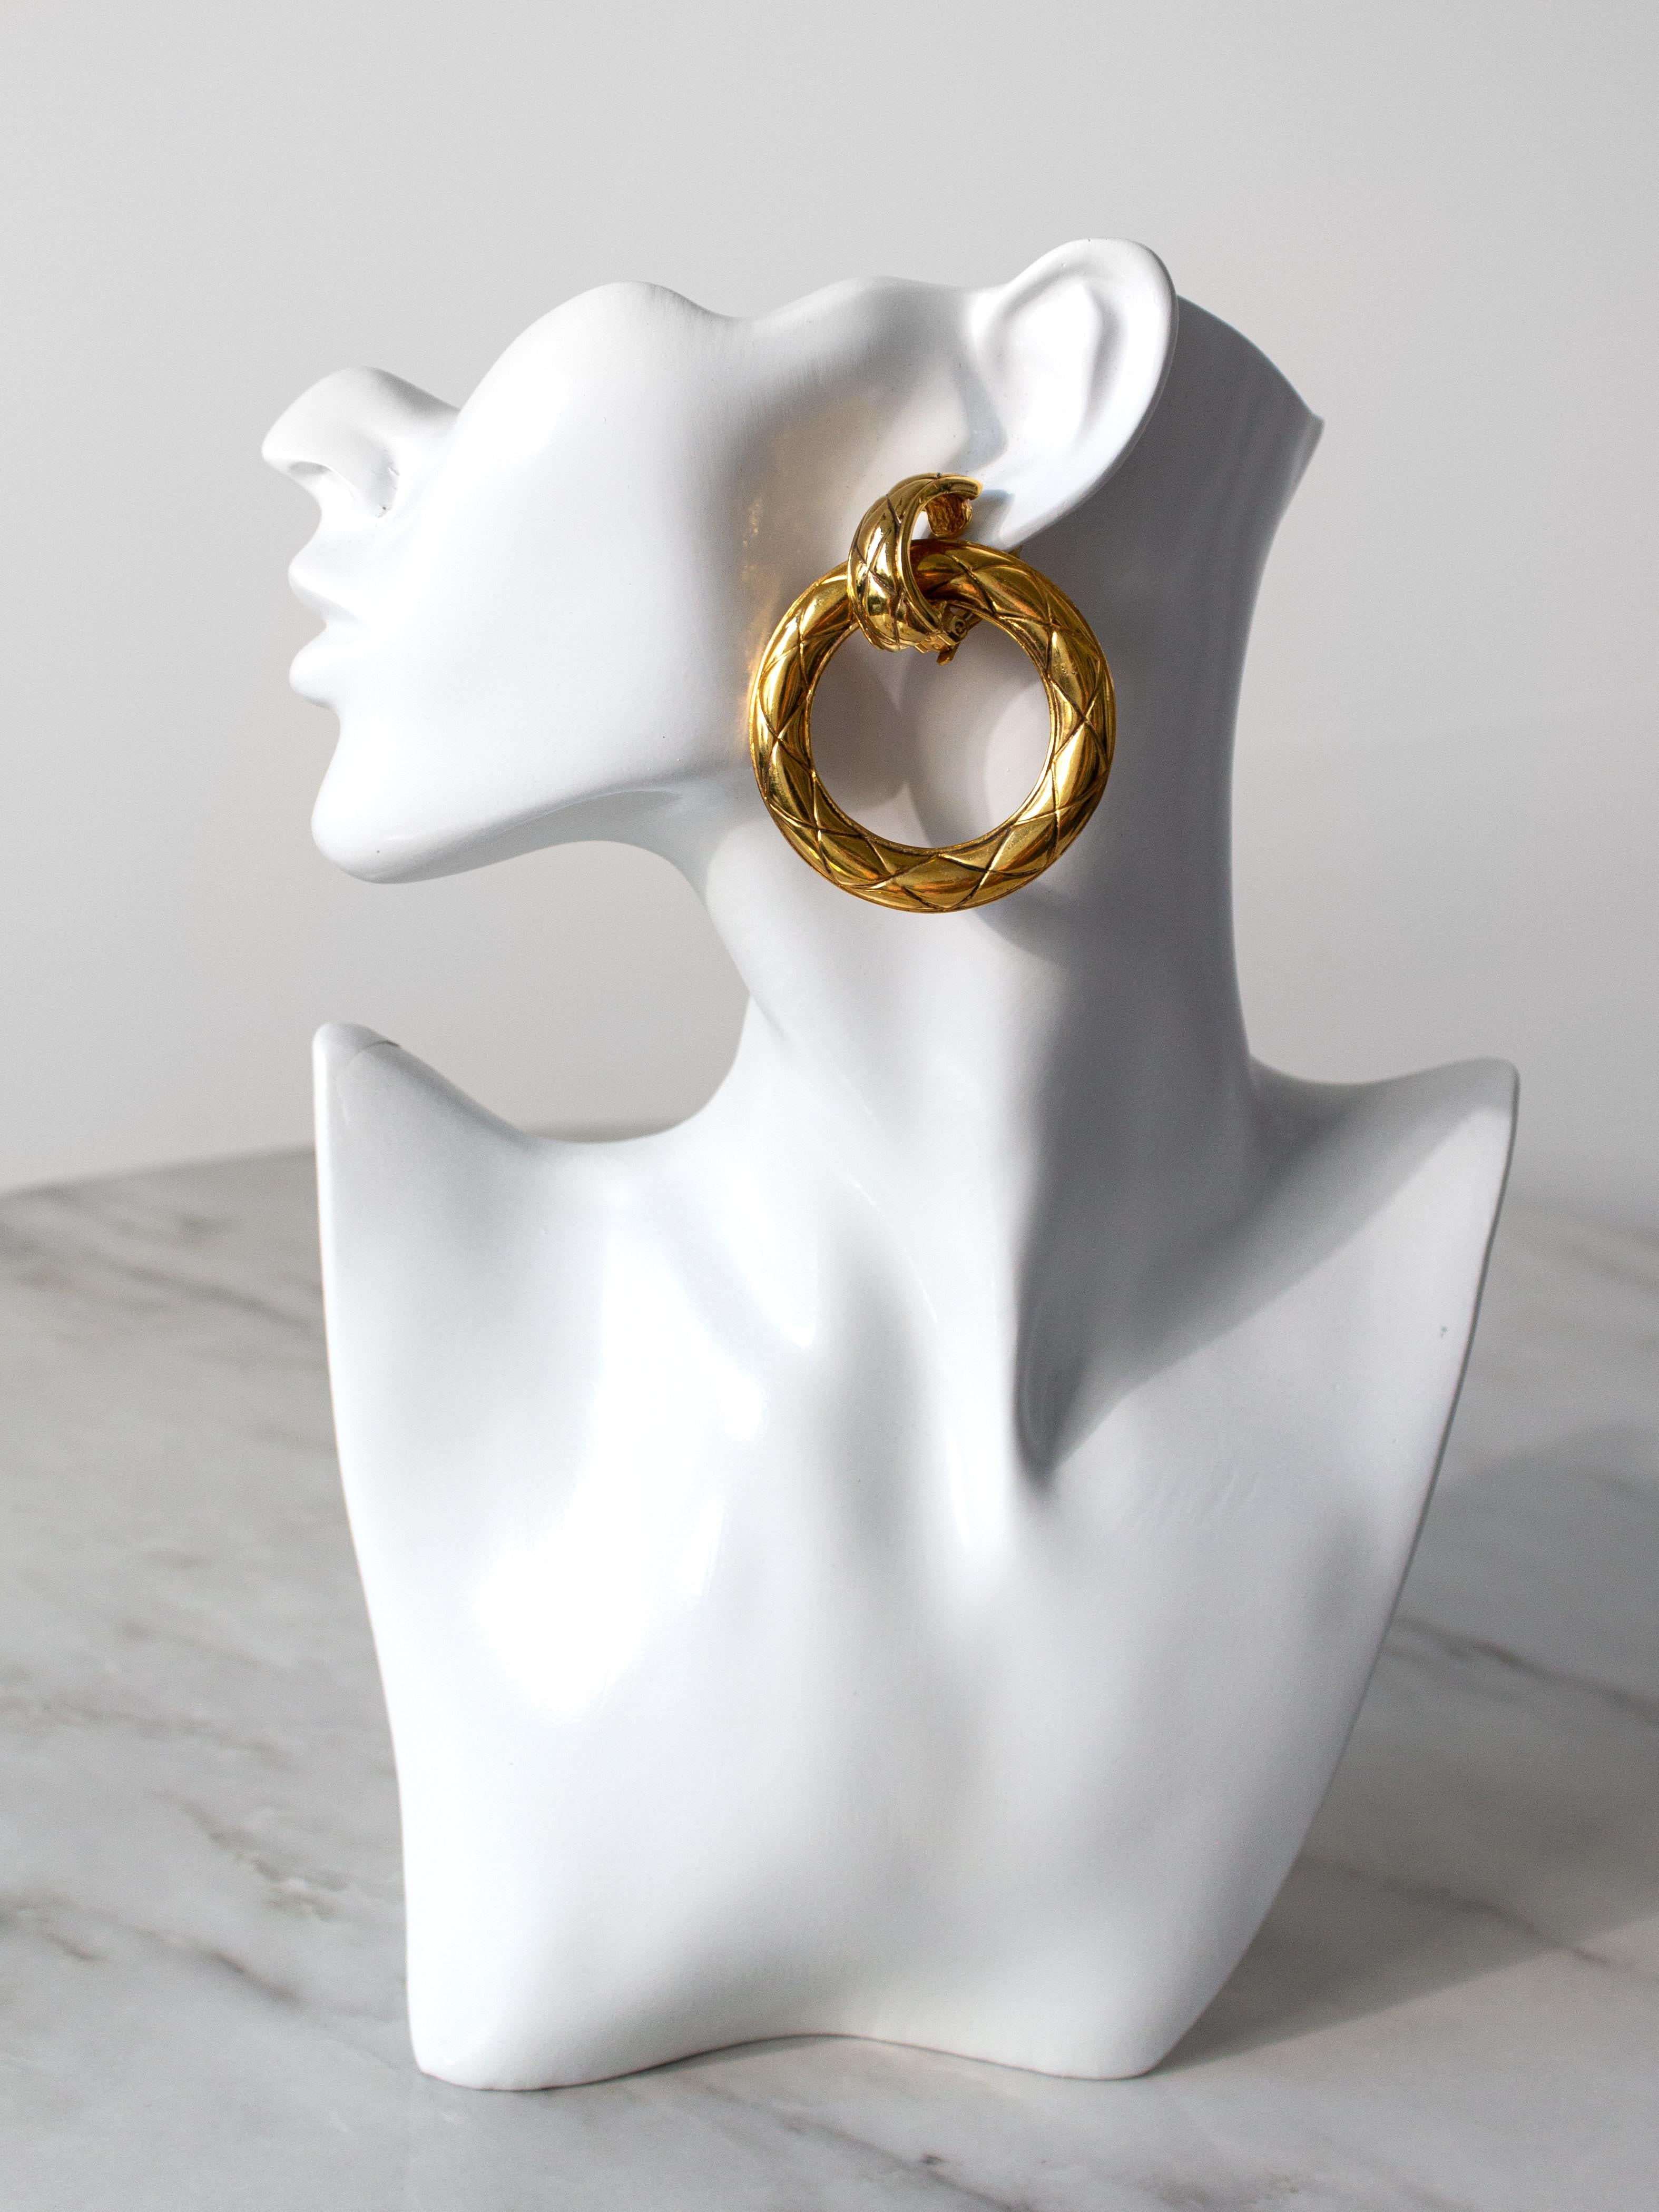 Presenting a stunning pair of vintage Chanel clip-on earrings, the epitome of 80s chic. Crafted from quilted gold-plated metal, these convertible earrings redefine versatility. They effortlessly transition from chic hoops to a quilted clip-on style,